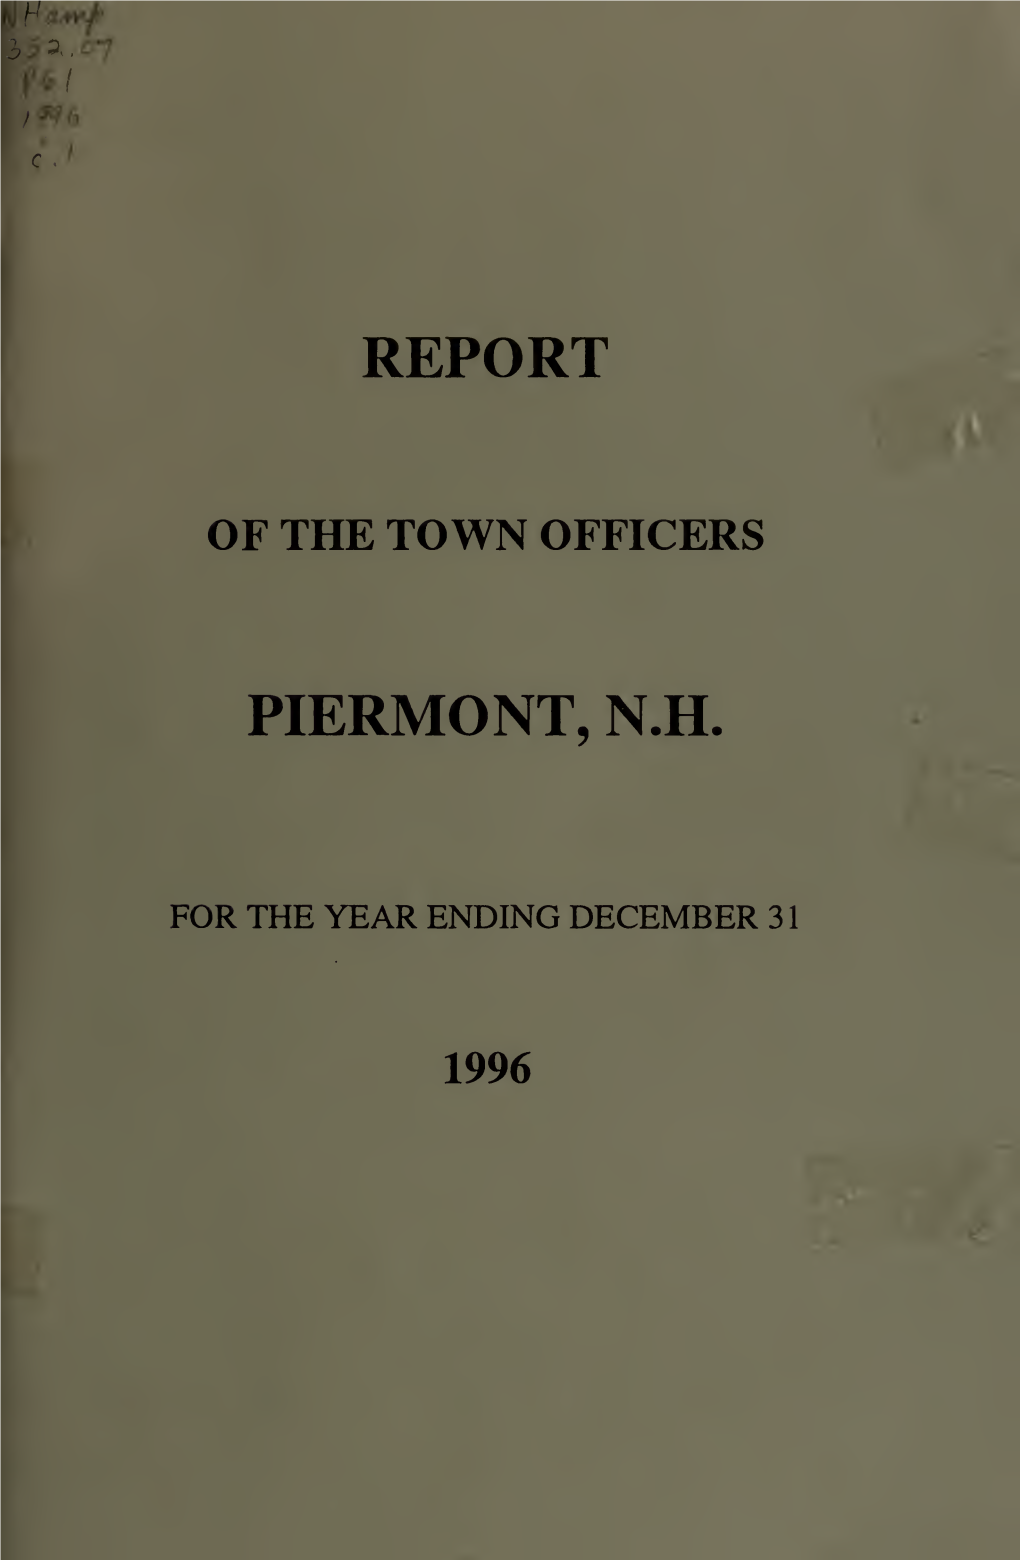 Annual Report of the Town of Piermont, New Hampshire